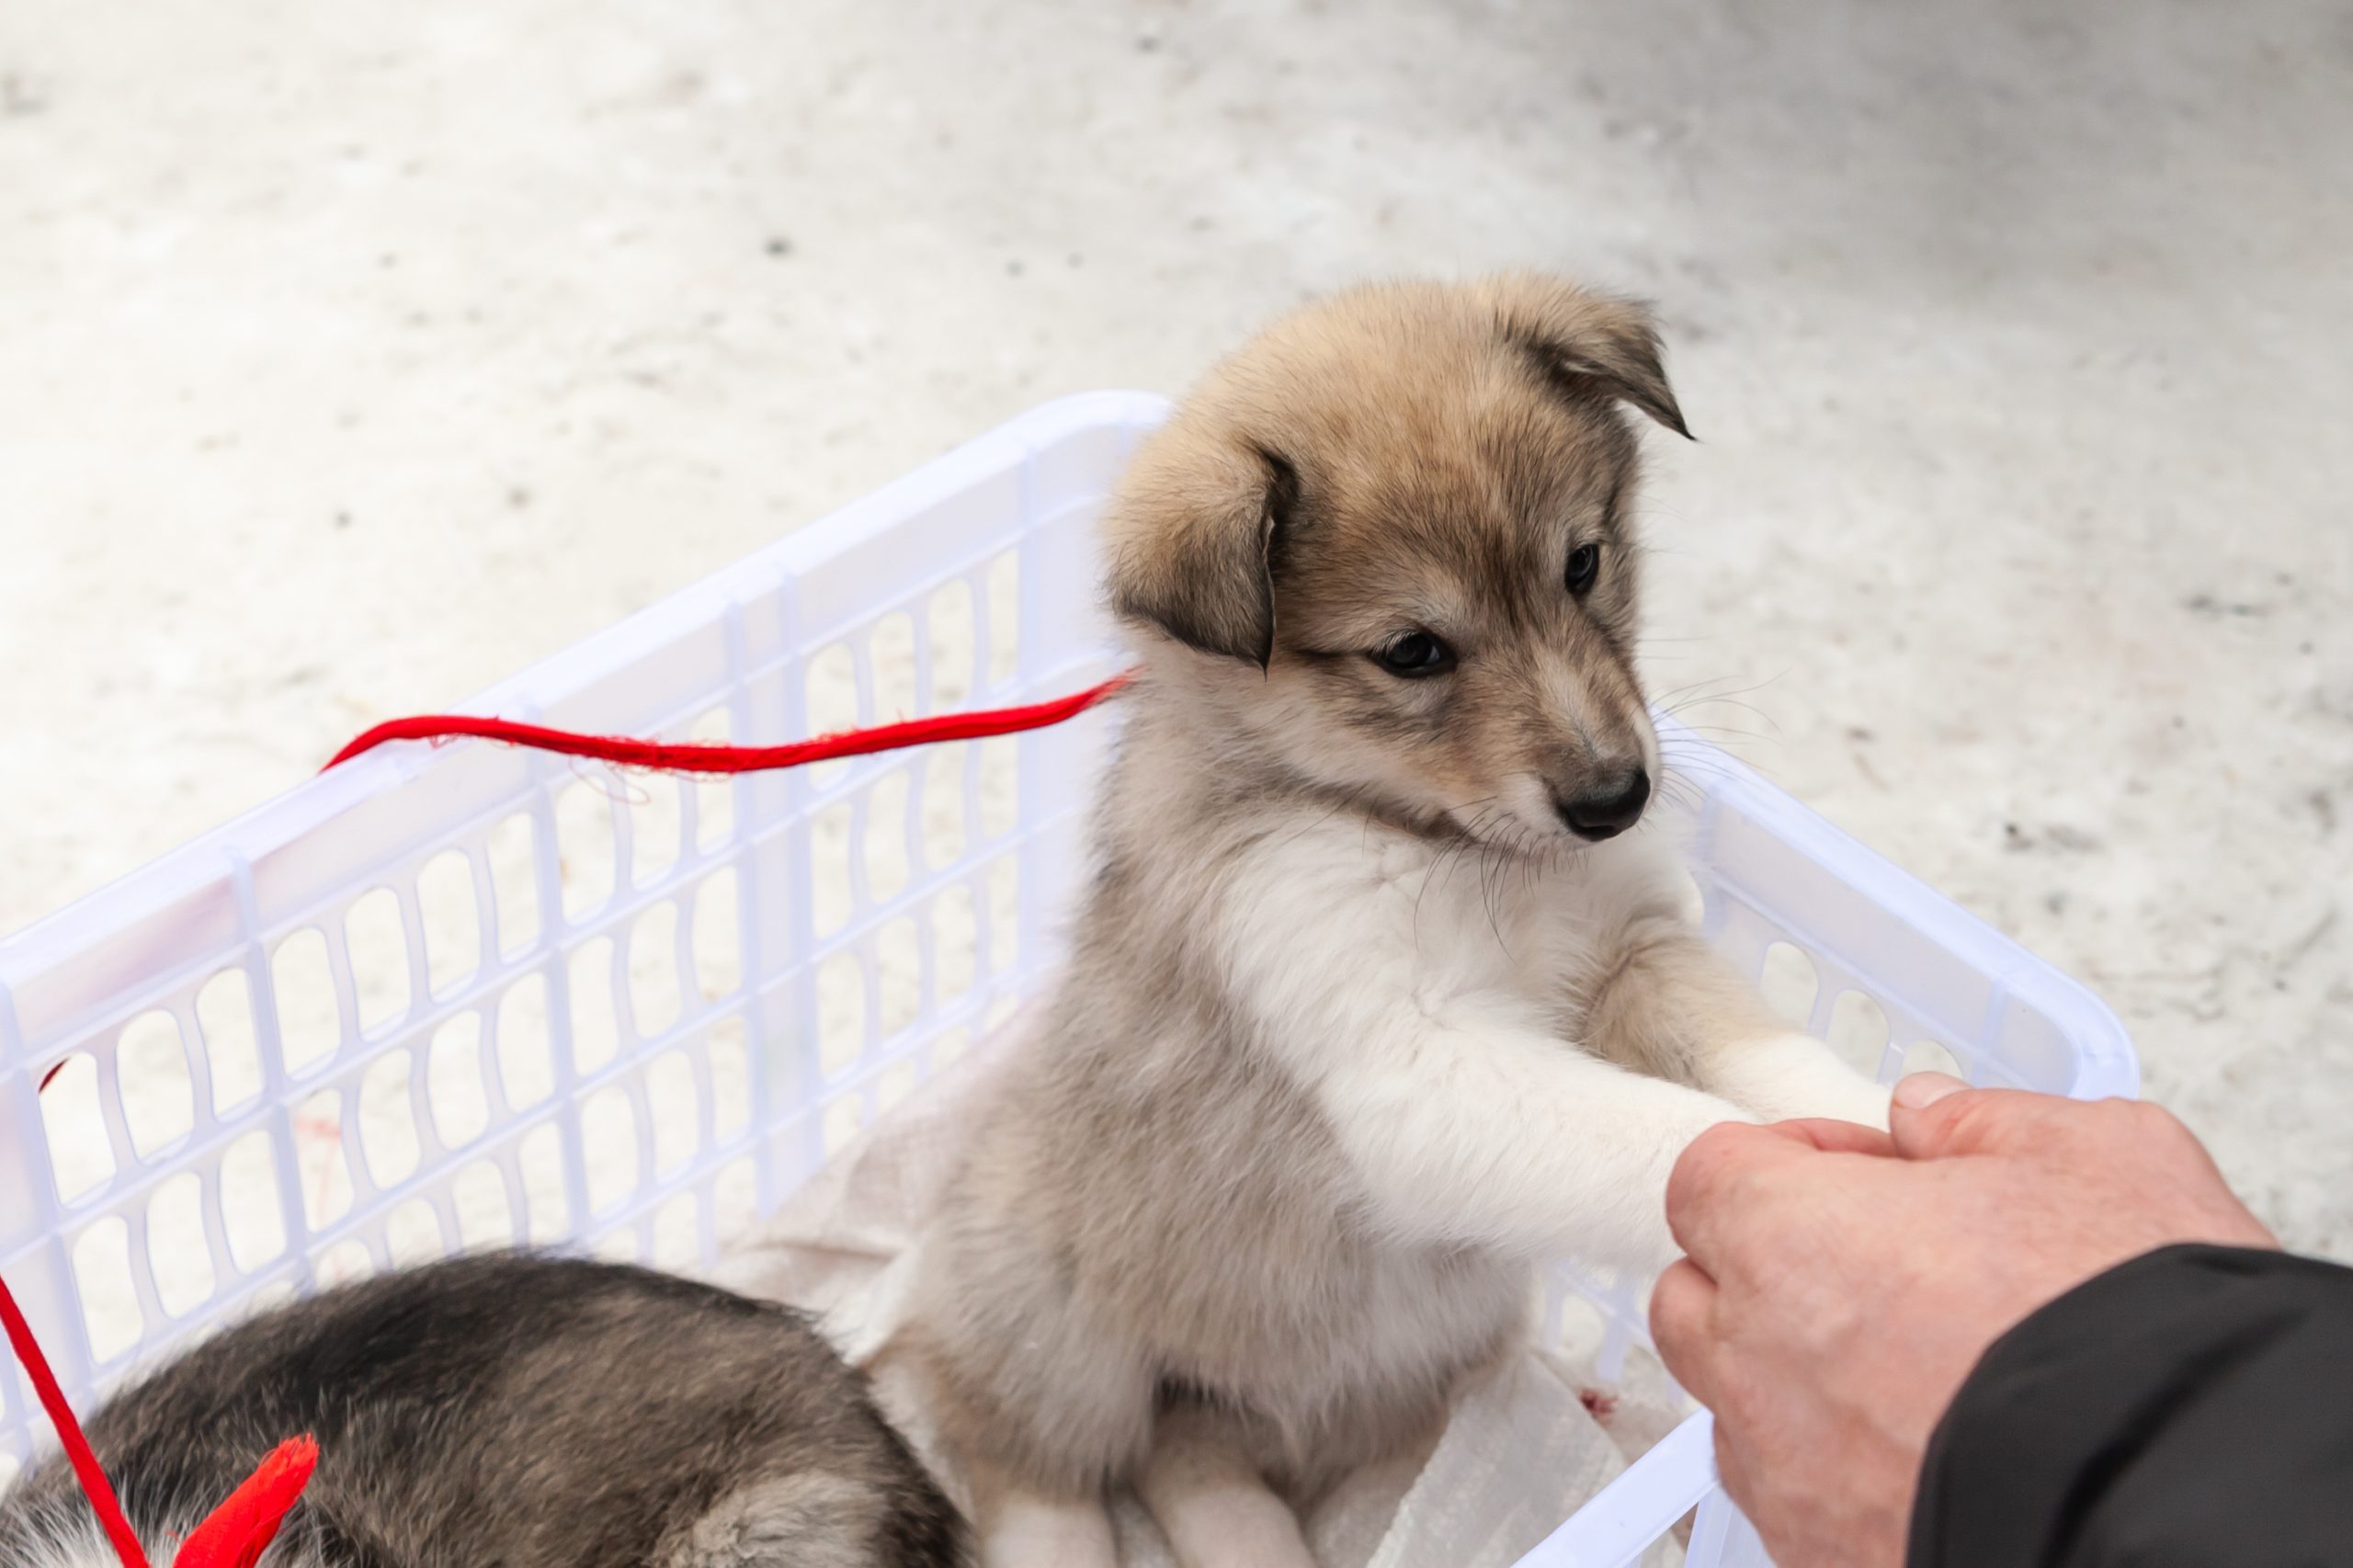 BVA warns puppy purchasers to ask key questions